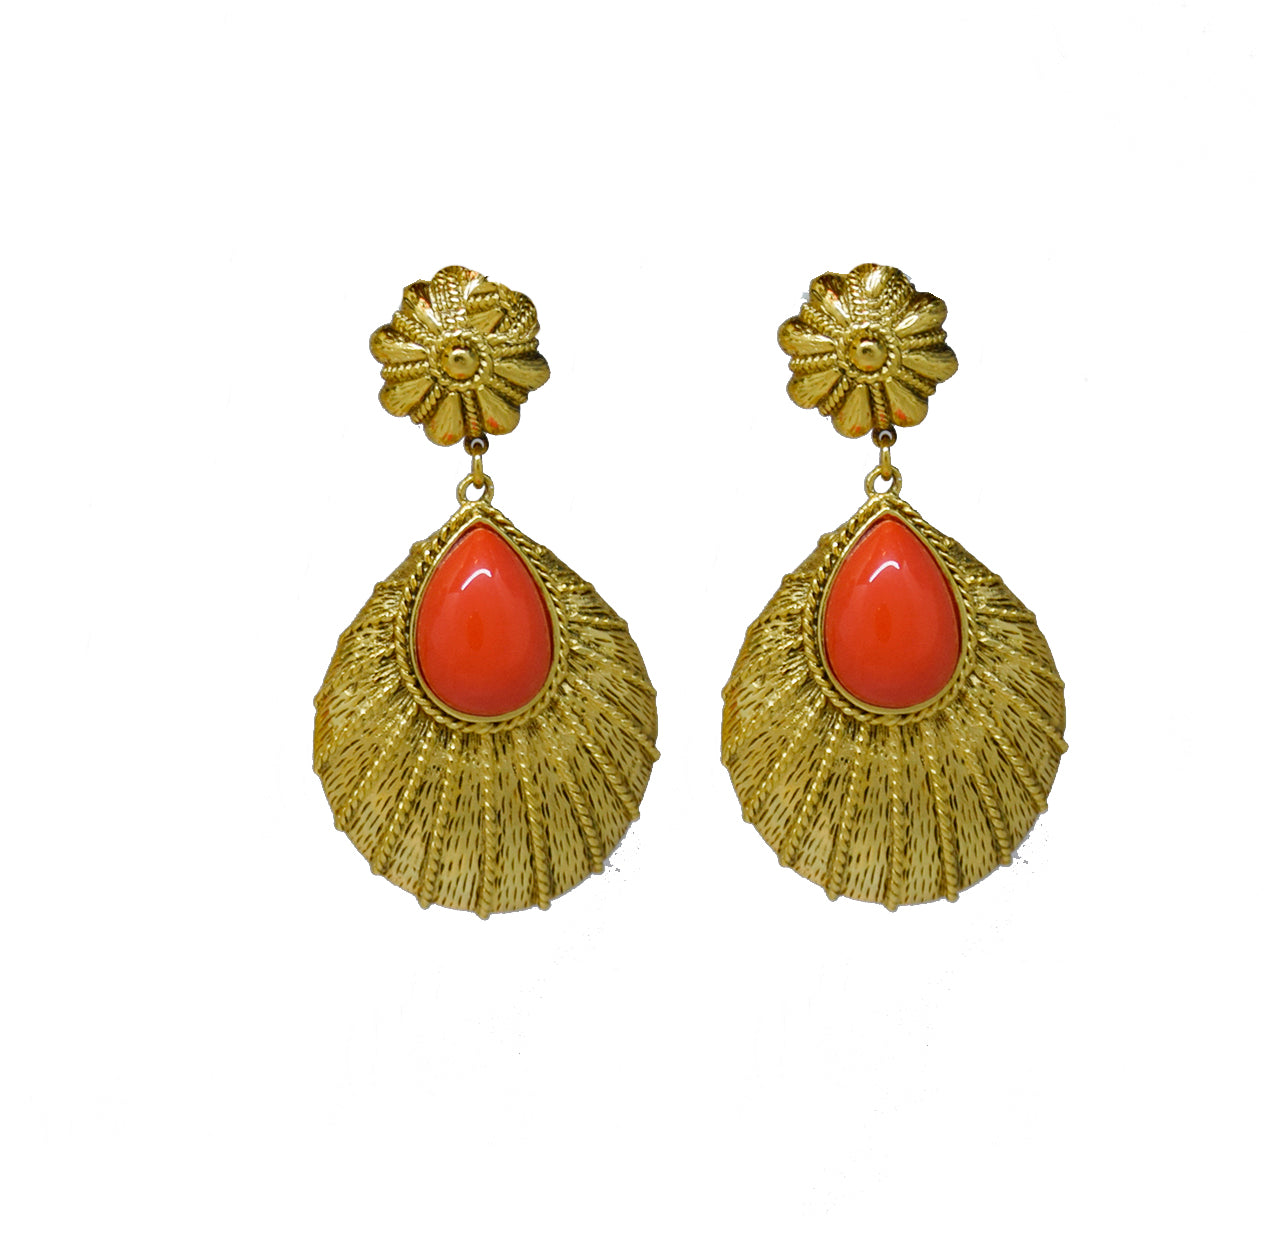 109 Textured 24 kt gold plated tear drop clip earring with coral stone